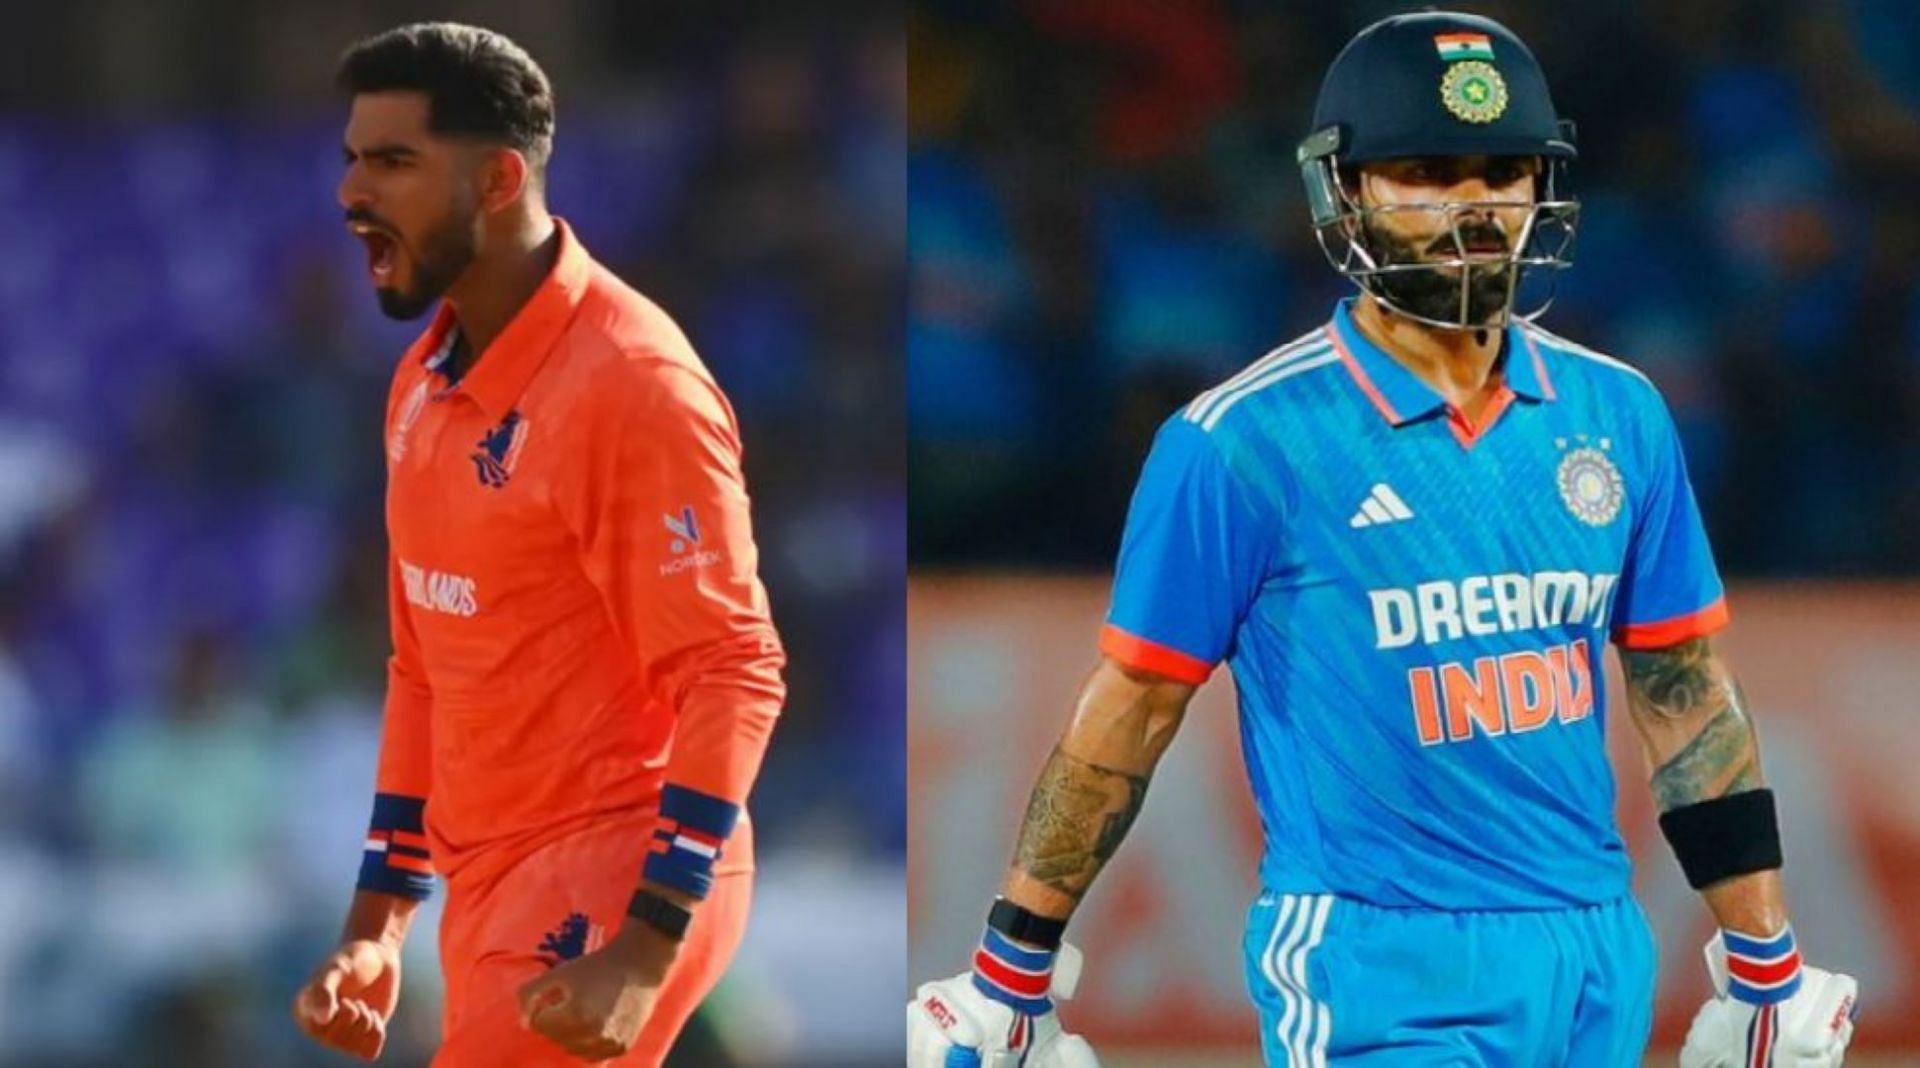 Aryan Dutt and Virat Kohli have never faced off against each other